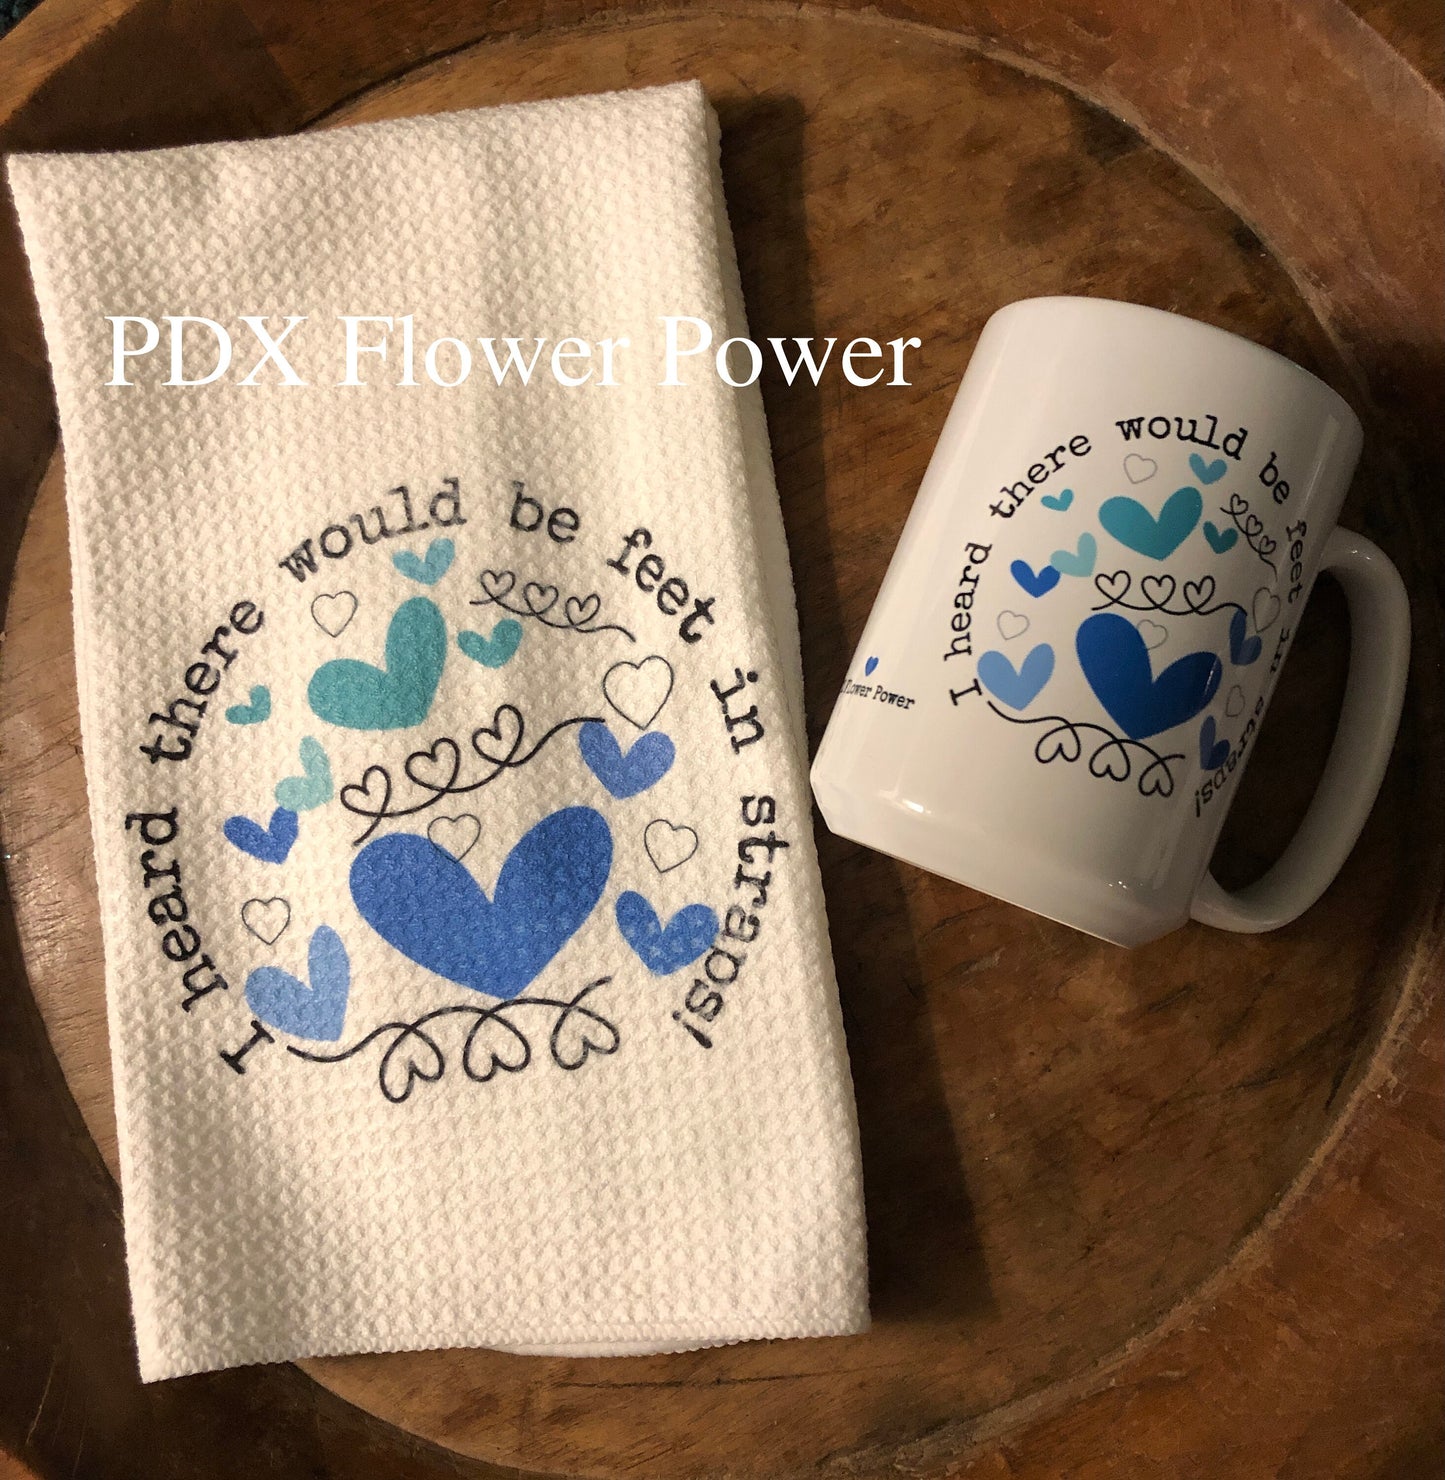 Pilates Gift Set  "I heard there would be feet in straps"  Mug and towel, limited holiday edition available now pilates gifts, Reformer love